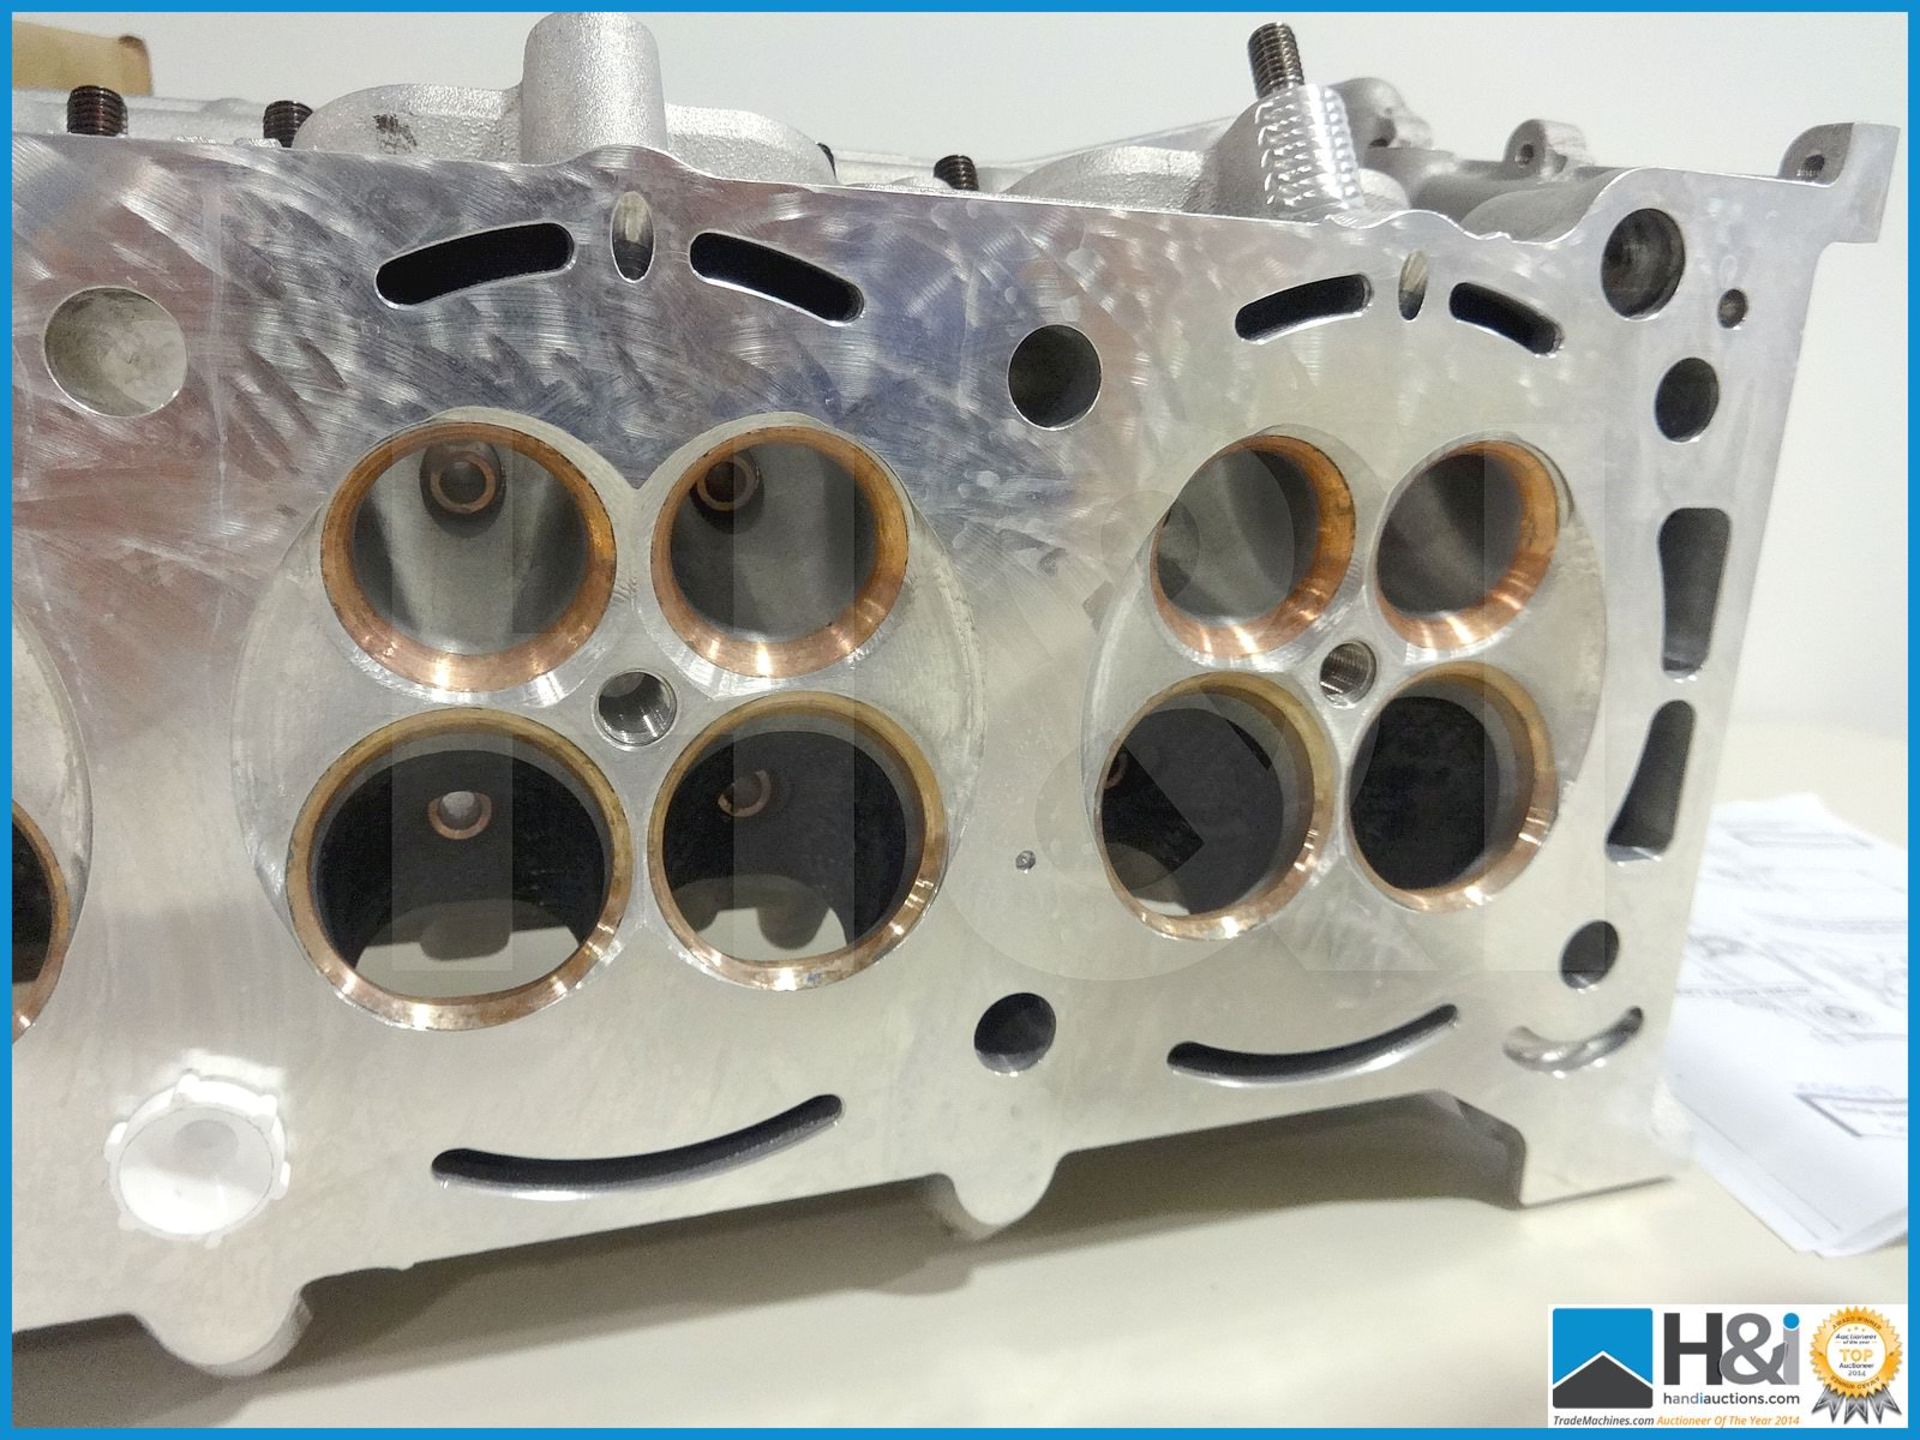 1 off Cosworth XG LH cylinder head assembly - shallow. Valued at over GBP 10,000. MC: XG8639 CILN: 1 - Bild 3 aus 8